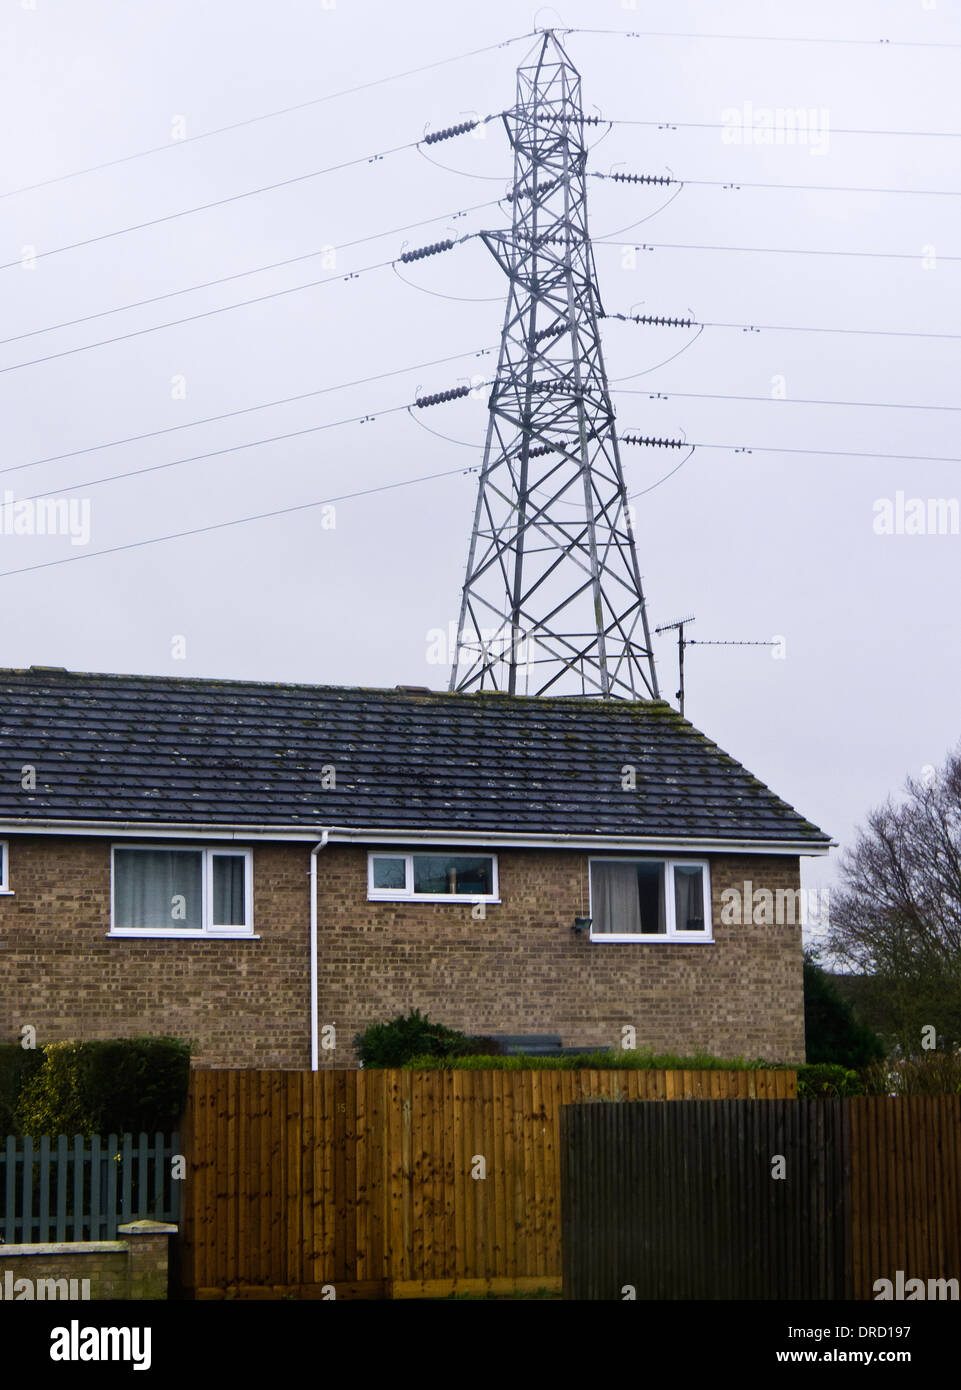 An electricity pylon in close proximity to people's homes. Stock Photo